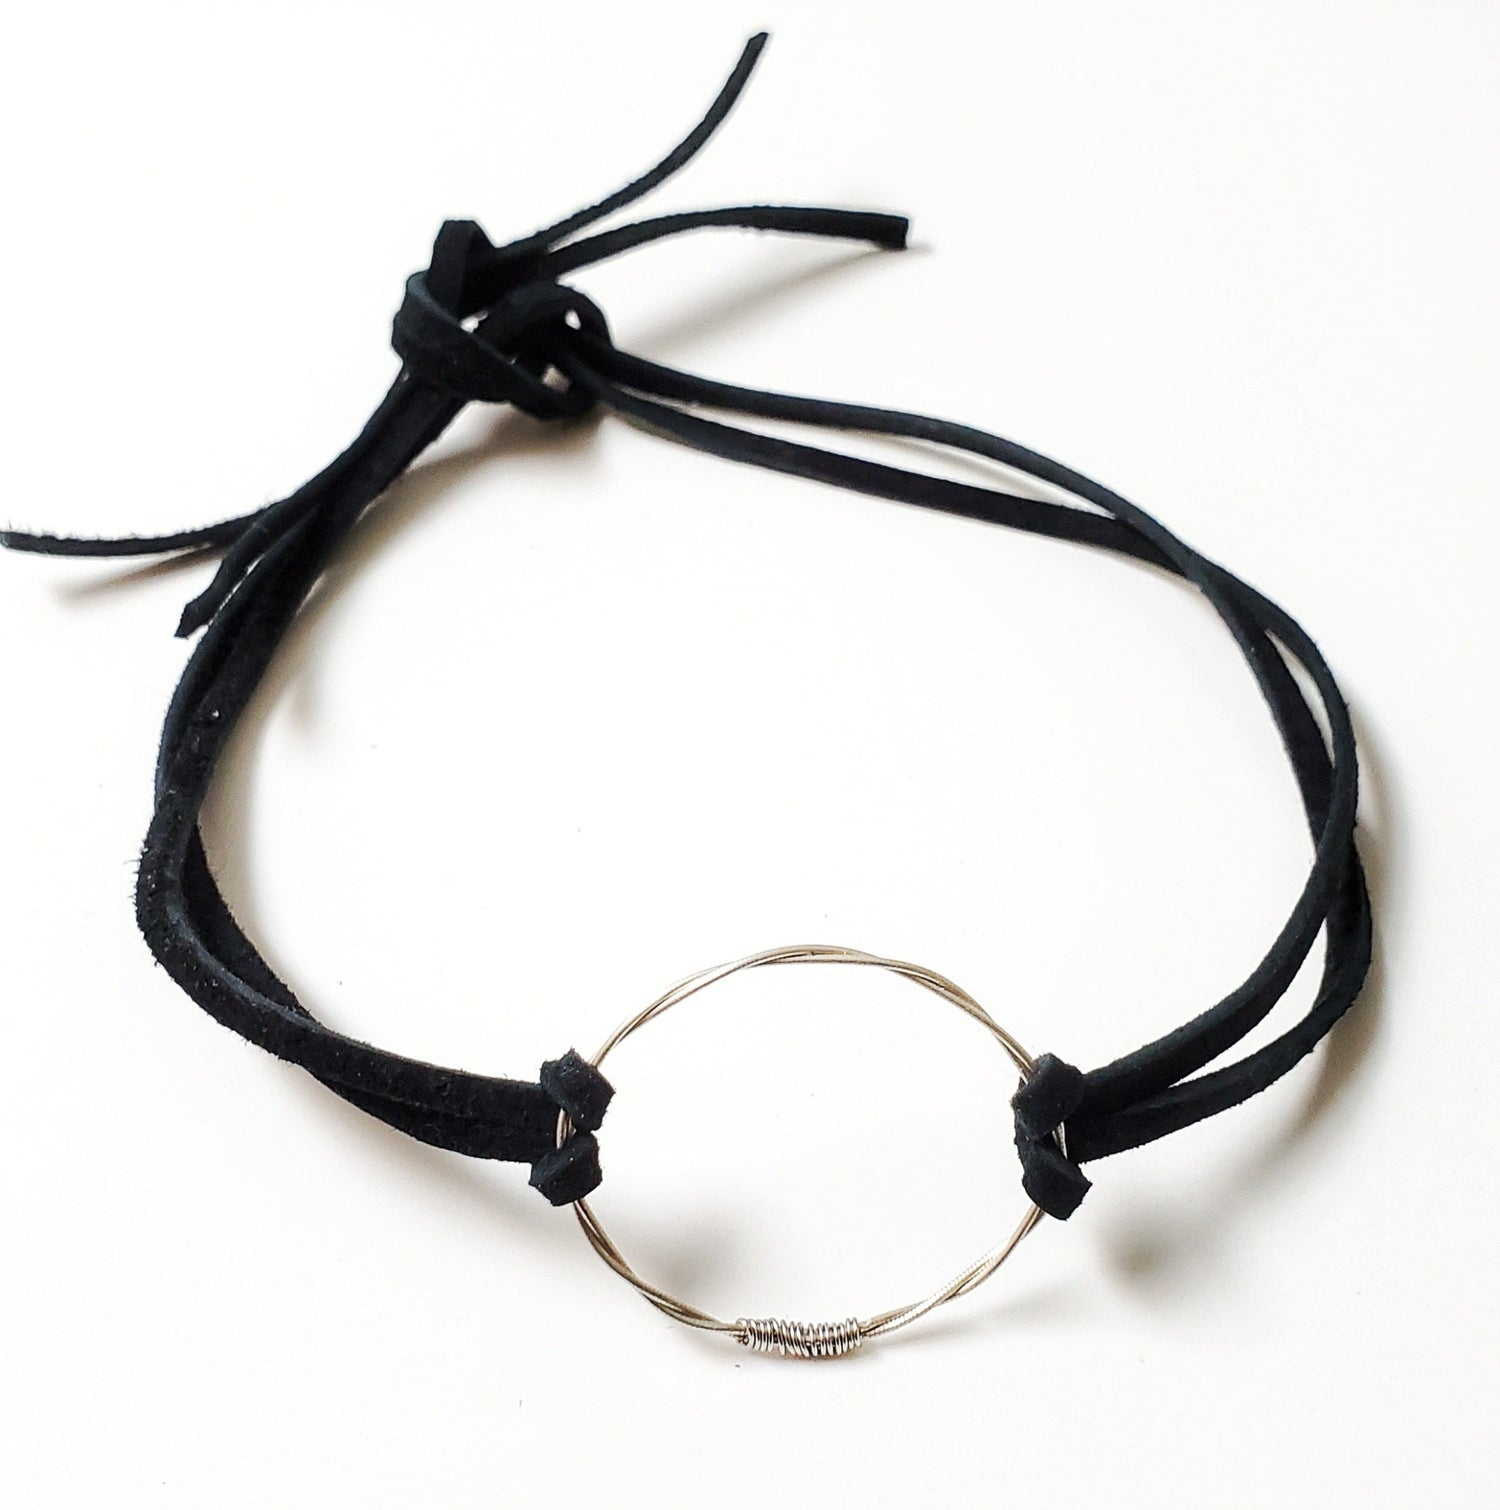 choker style necklace - in the middle is a circle made from a piece of upcycled violin string on either side there are black suede cords - white background